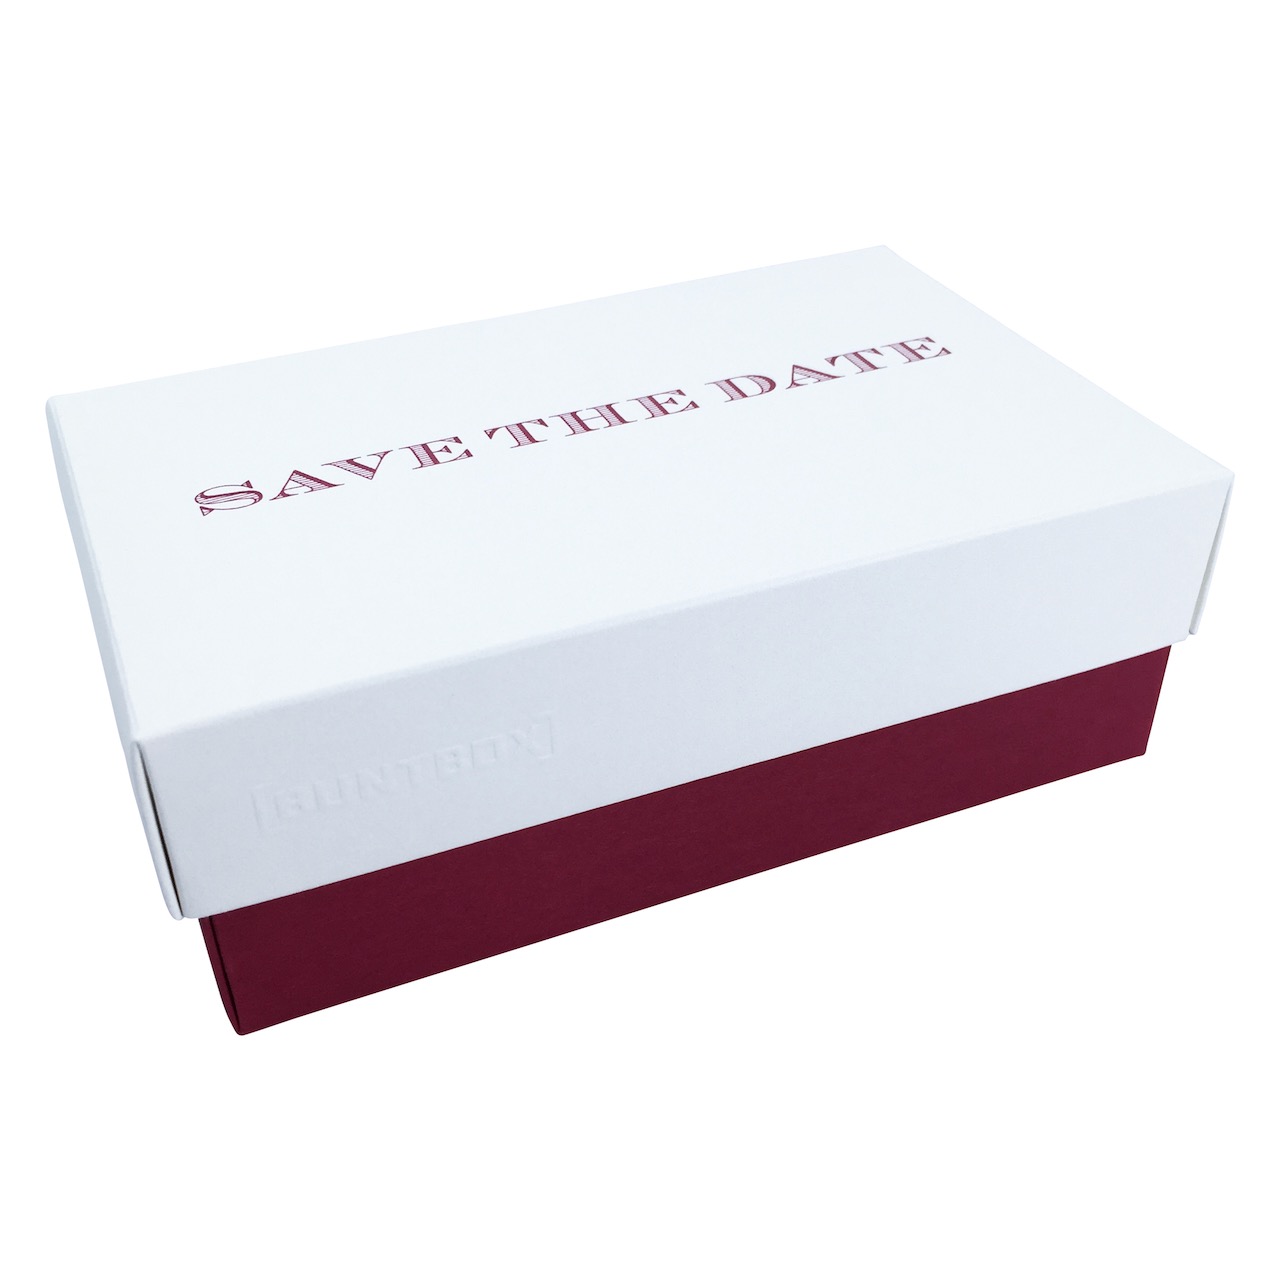 Buntbox S Fine Paper Save the Date in Champagner-Bordeaux